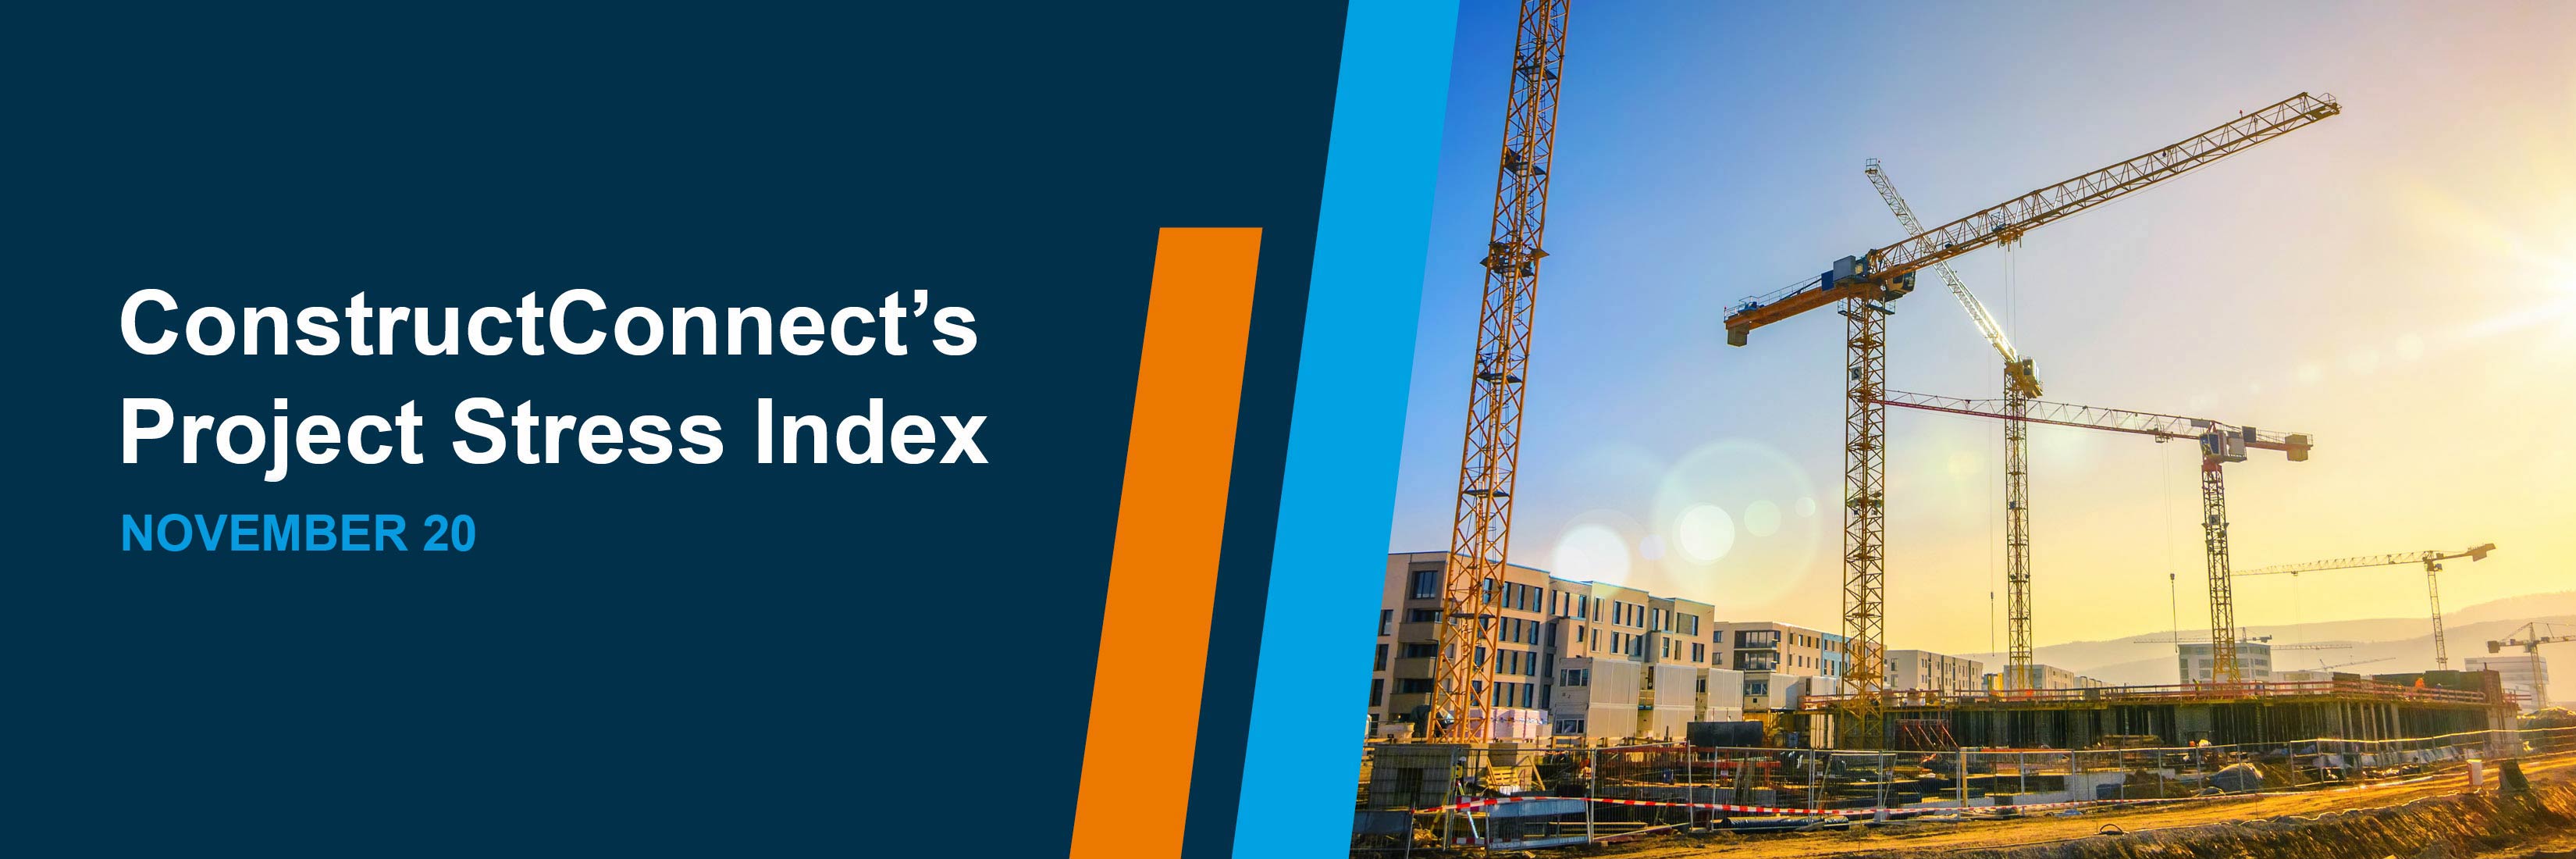 ConstructConnect's Project Stress Index - November 20